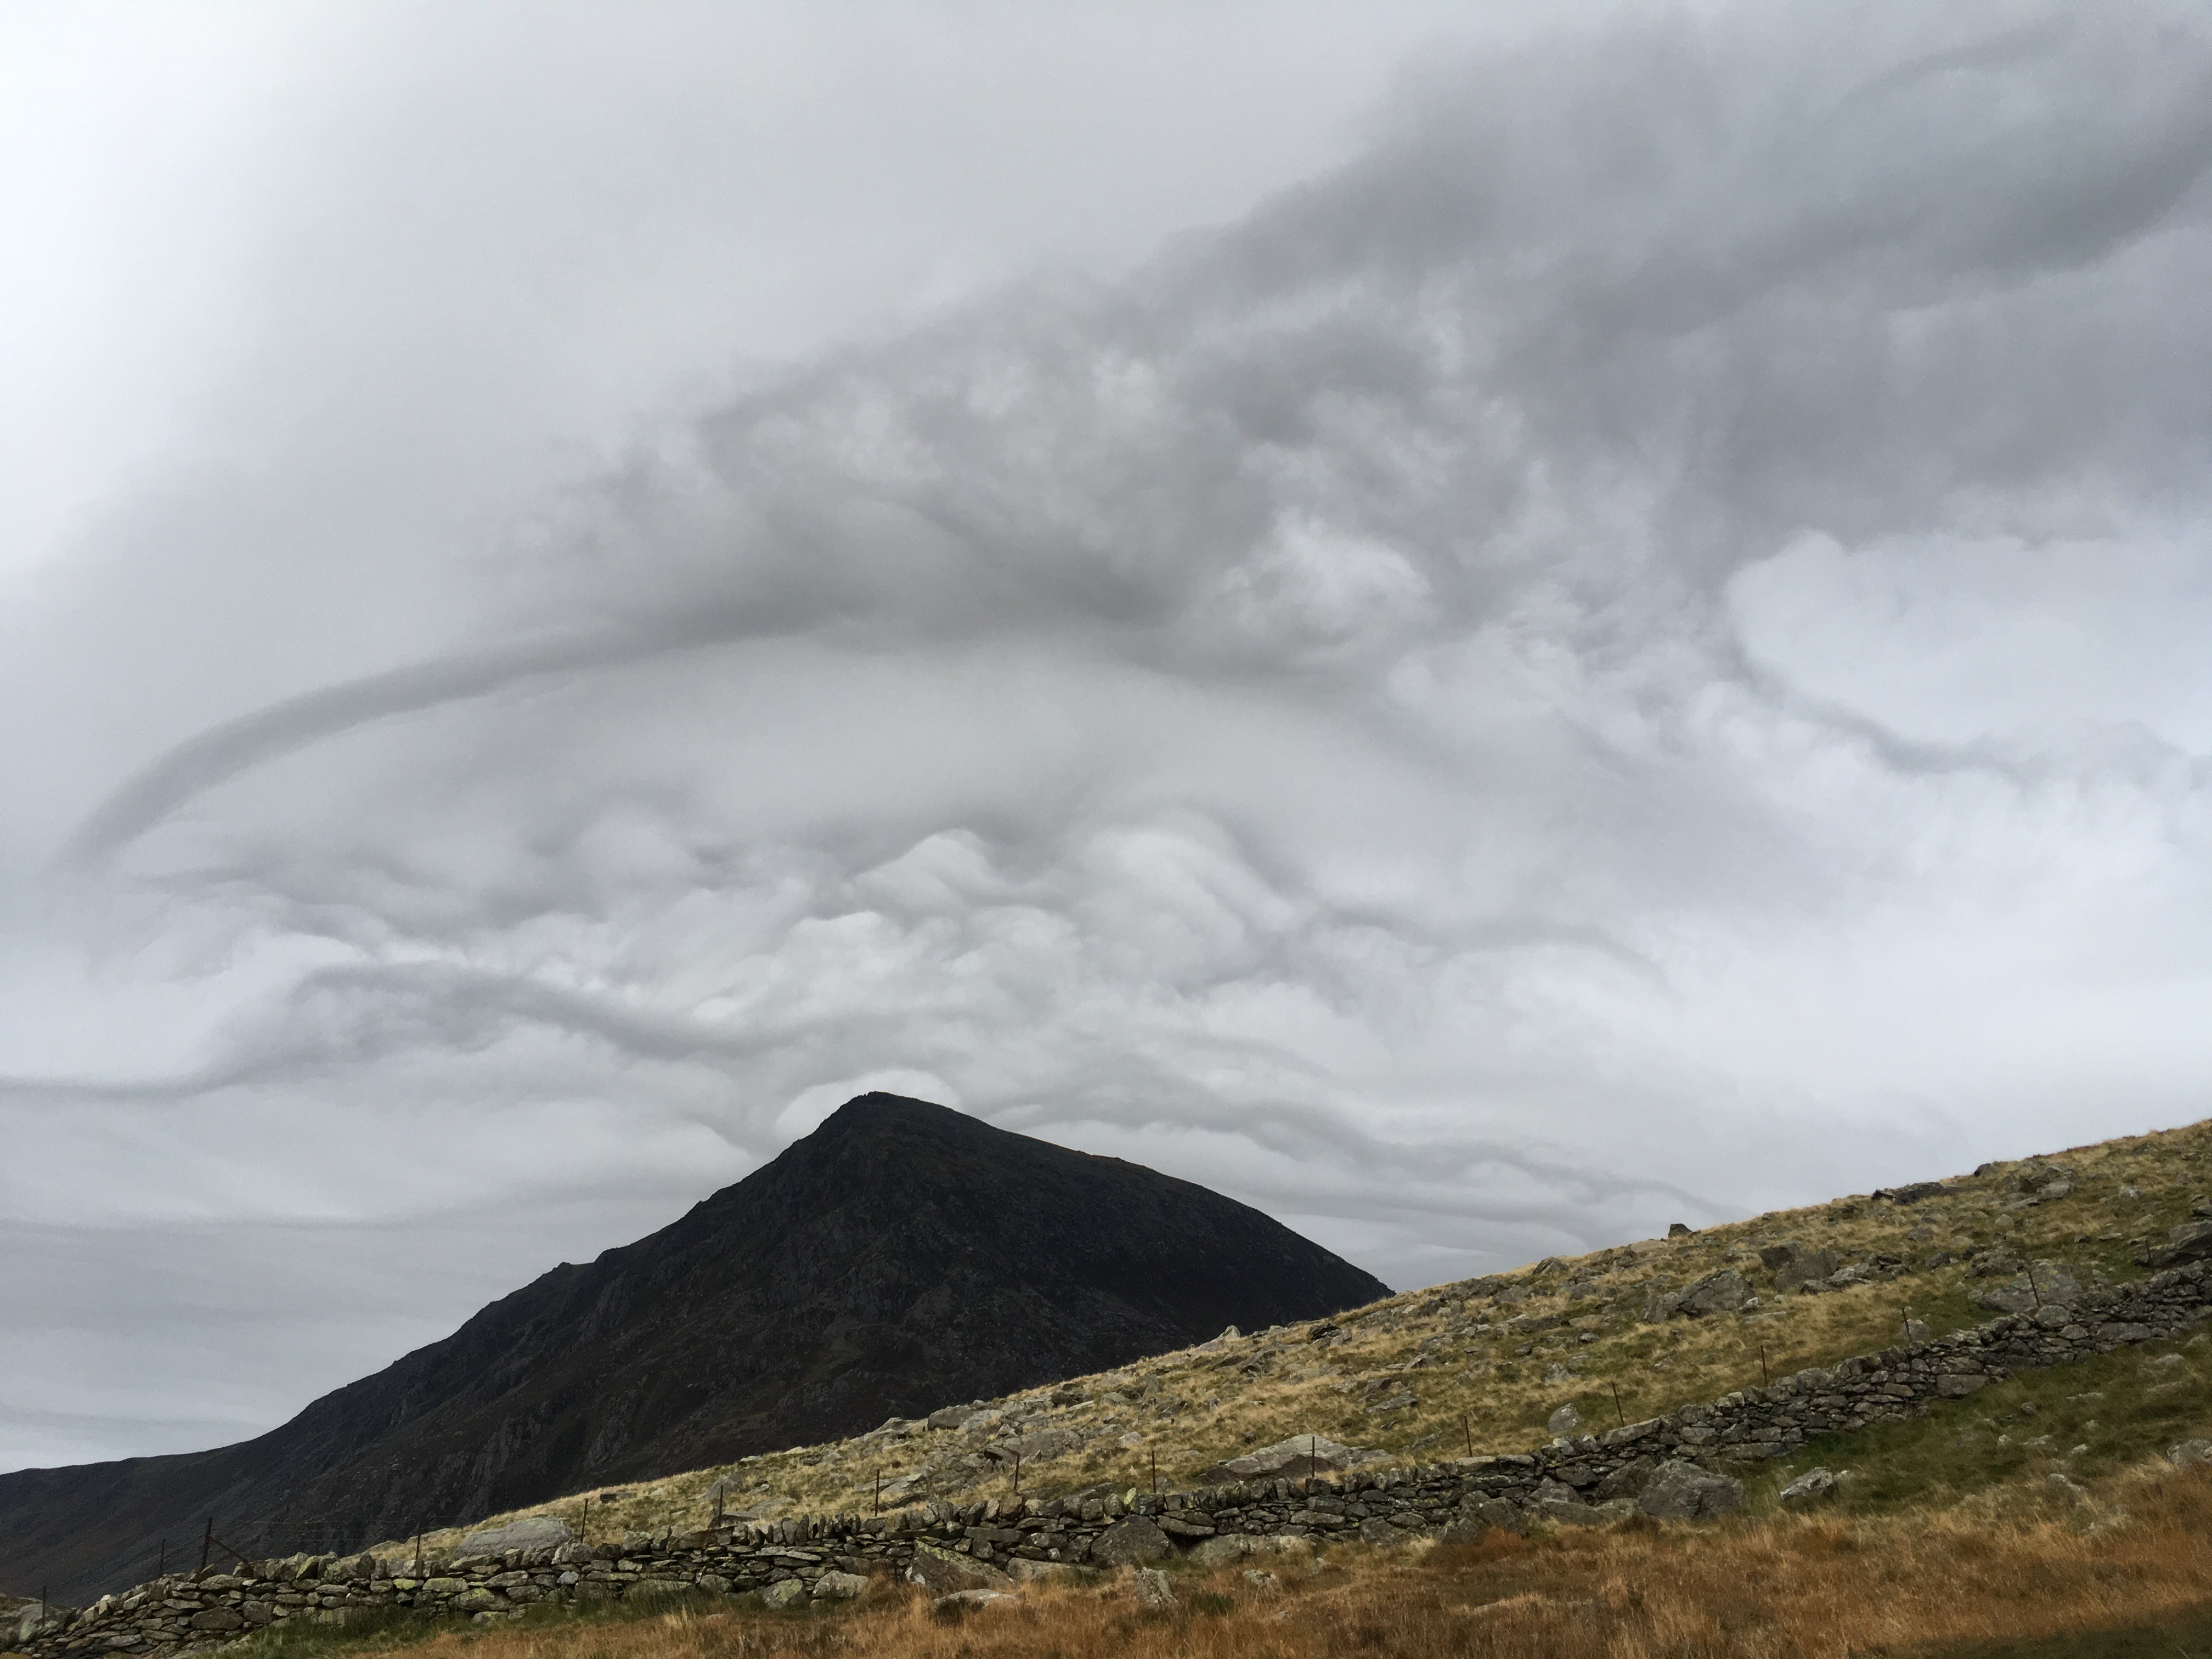 Caption: Asperitas clouds spotted over Snowdonia National park on Sunday 13th November 2016 (Credit: Patrick Hickie)